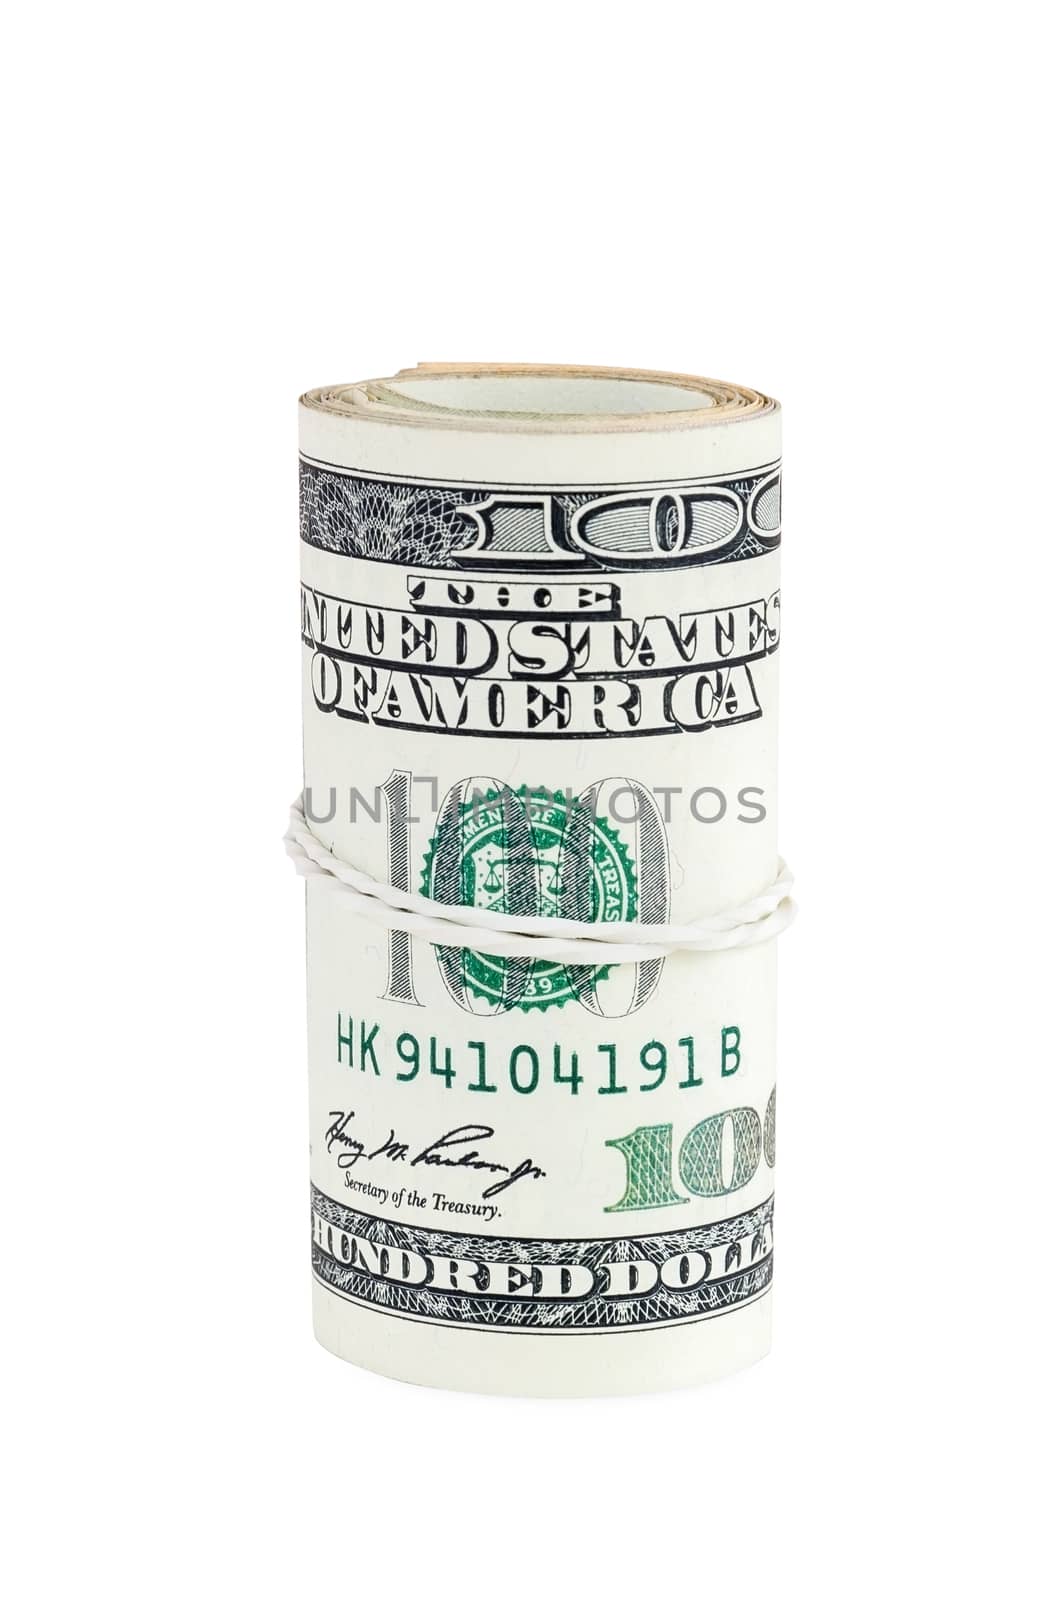 Rolled banknotes of 100 dollars by mkos83